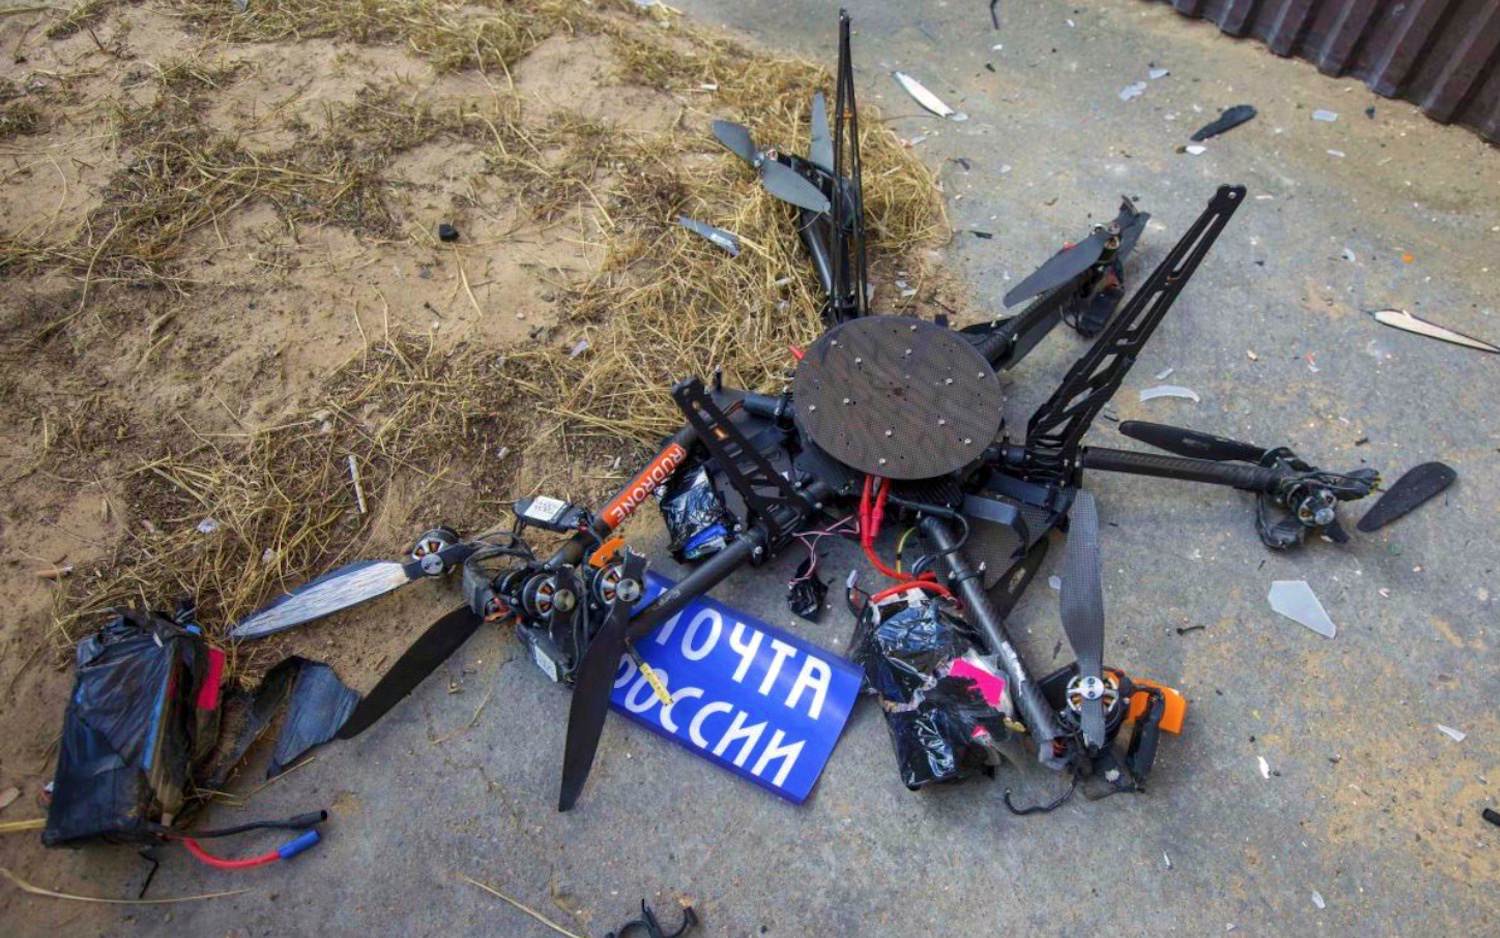 Russian postal drone crashes into a wall during debut flight 0003